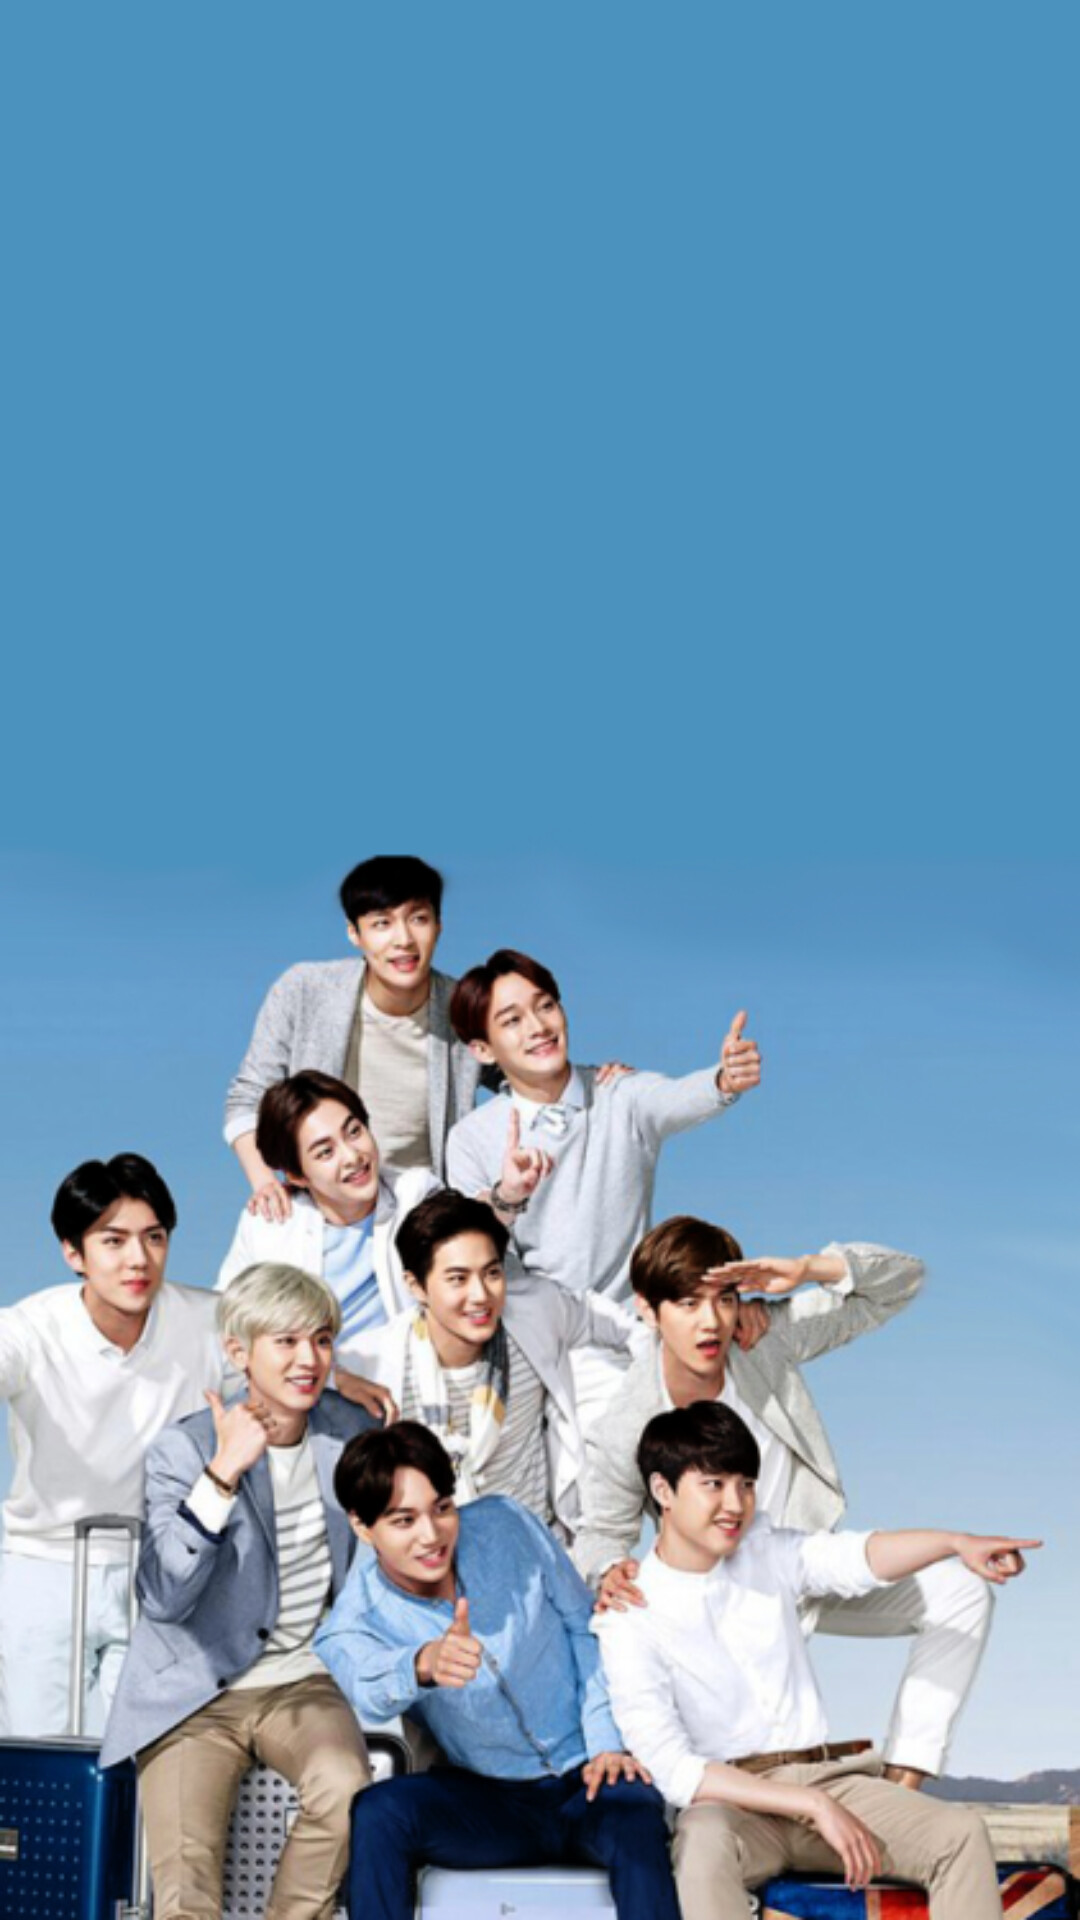 EXO: The band was awarded the Newcomer Award at the Golden Disc Awards. 1080x1920 Full HD Wallpaper.